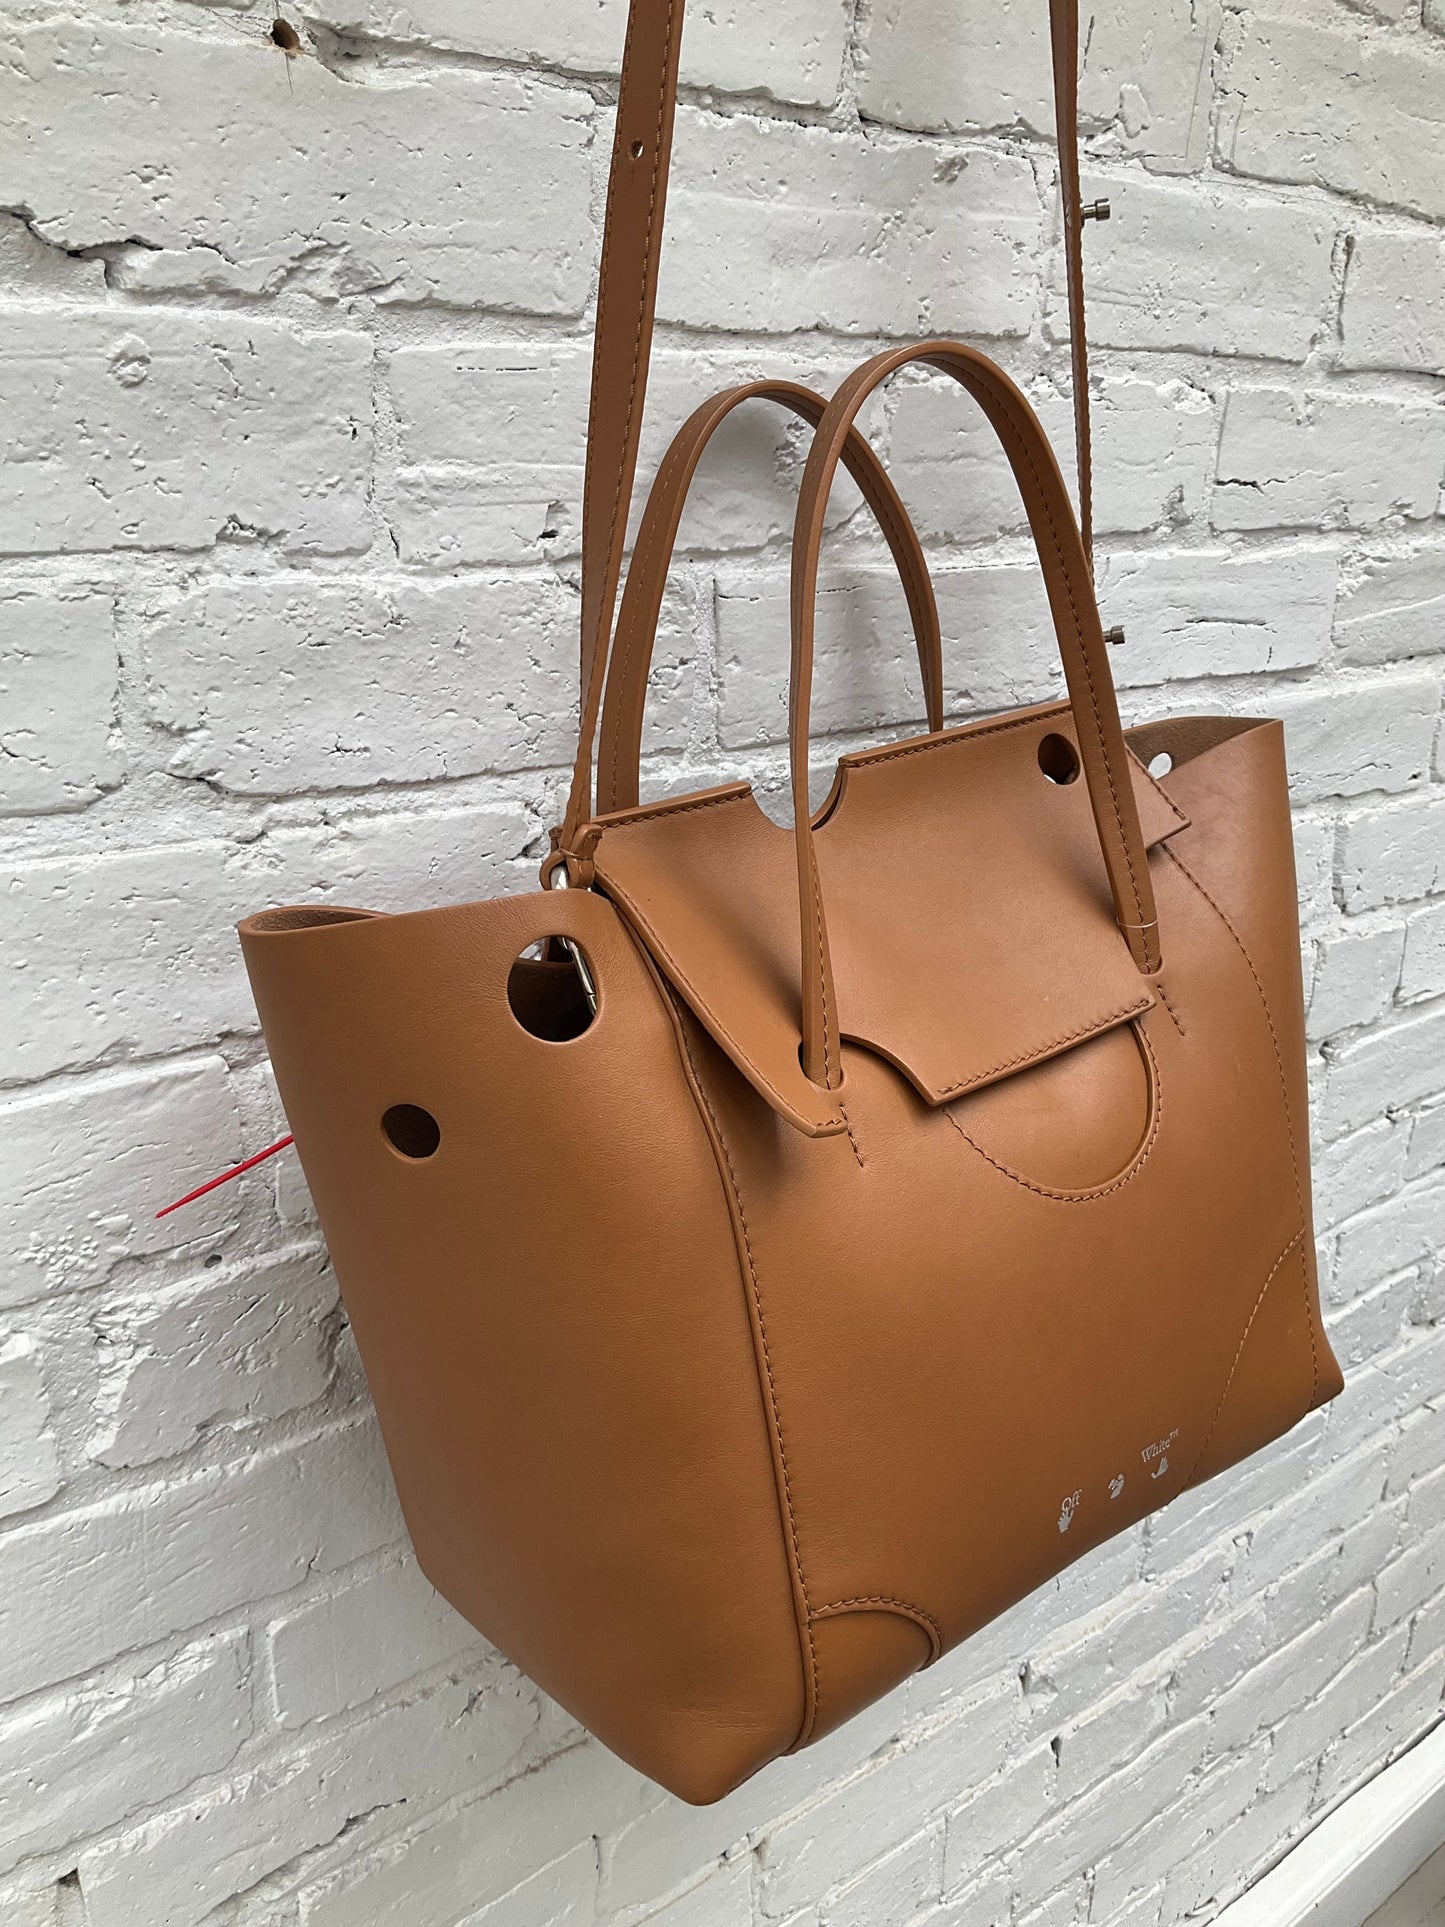 Off-White Tan Leather Tote